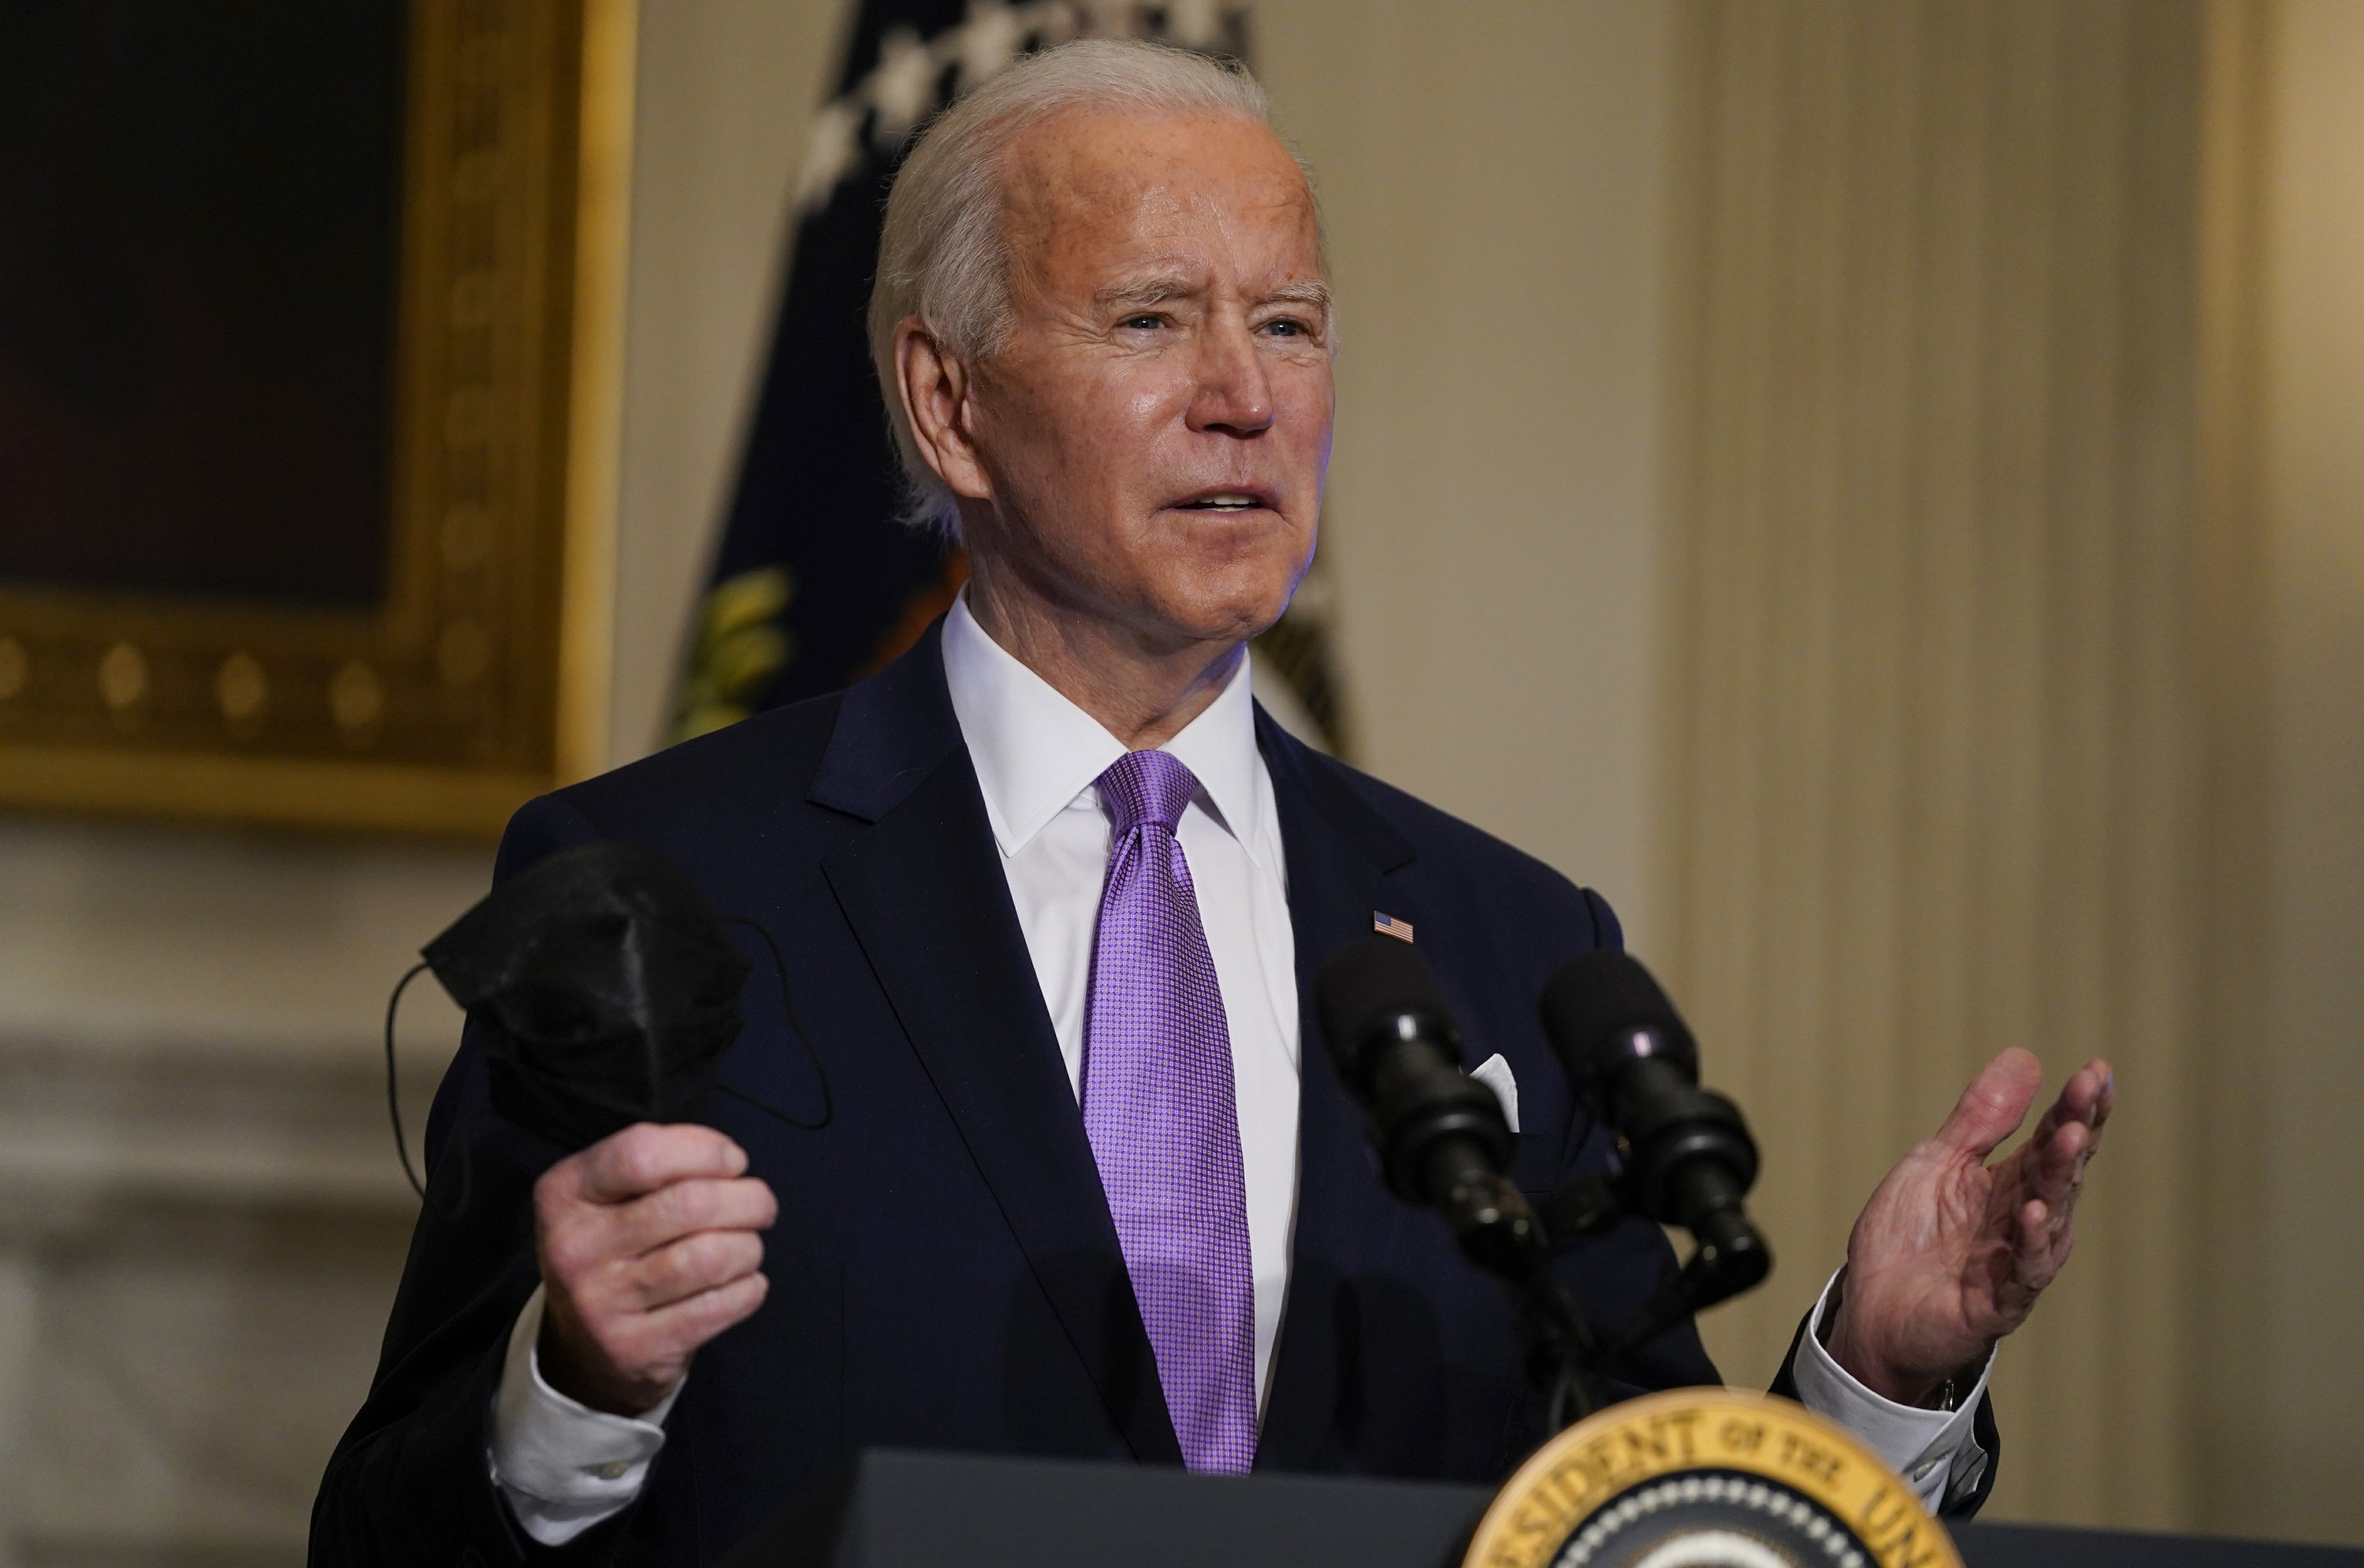 Biden says he’s ‘bringing the professionals back’ for virus briefings